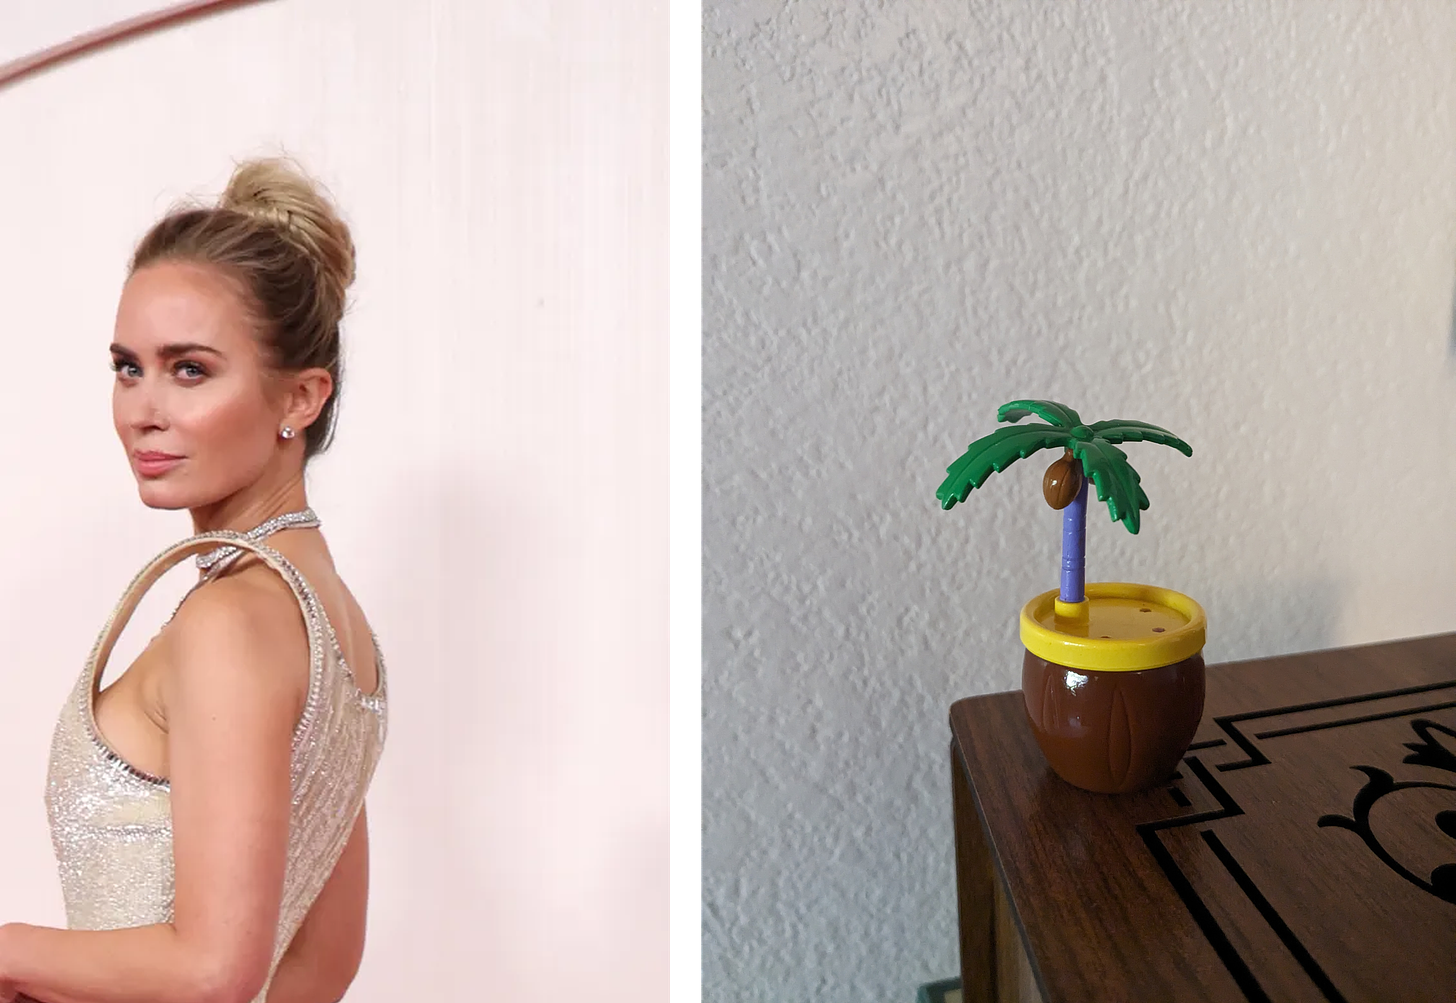 Left: Emily Blunt in a very architectural beige dress. Right: A round plastic kiosk with a palm tree sticking out of it.